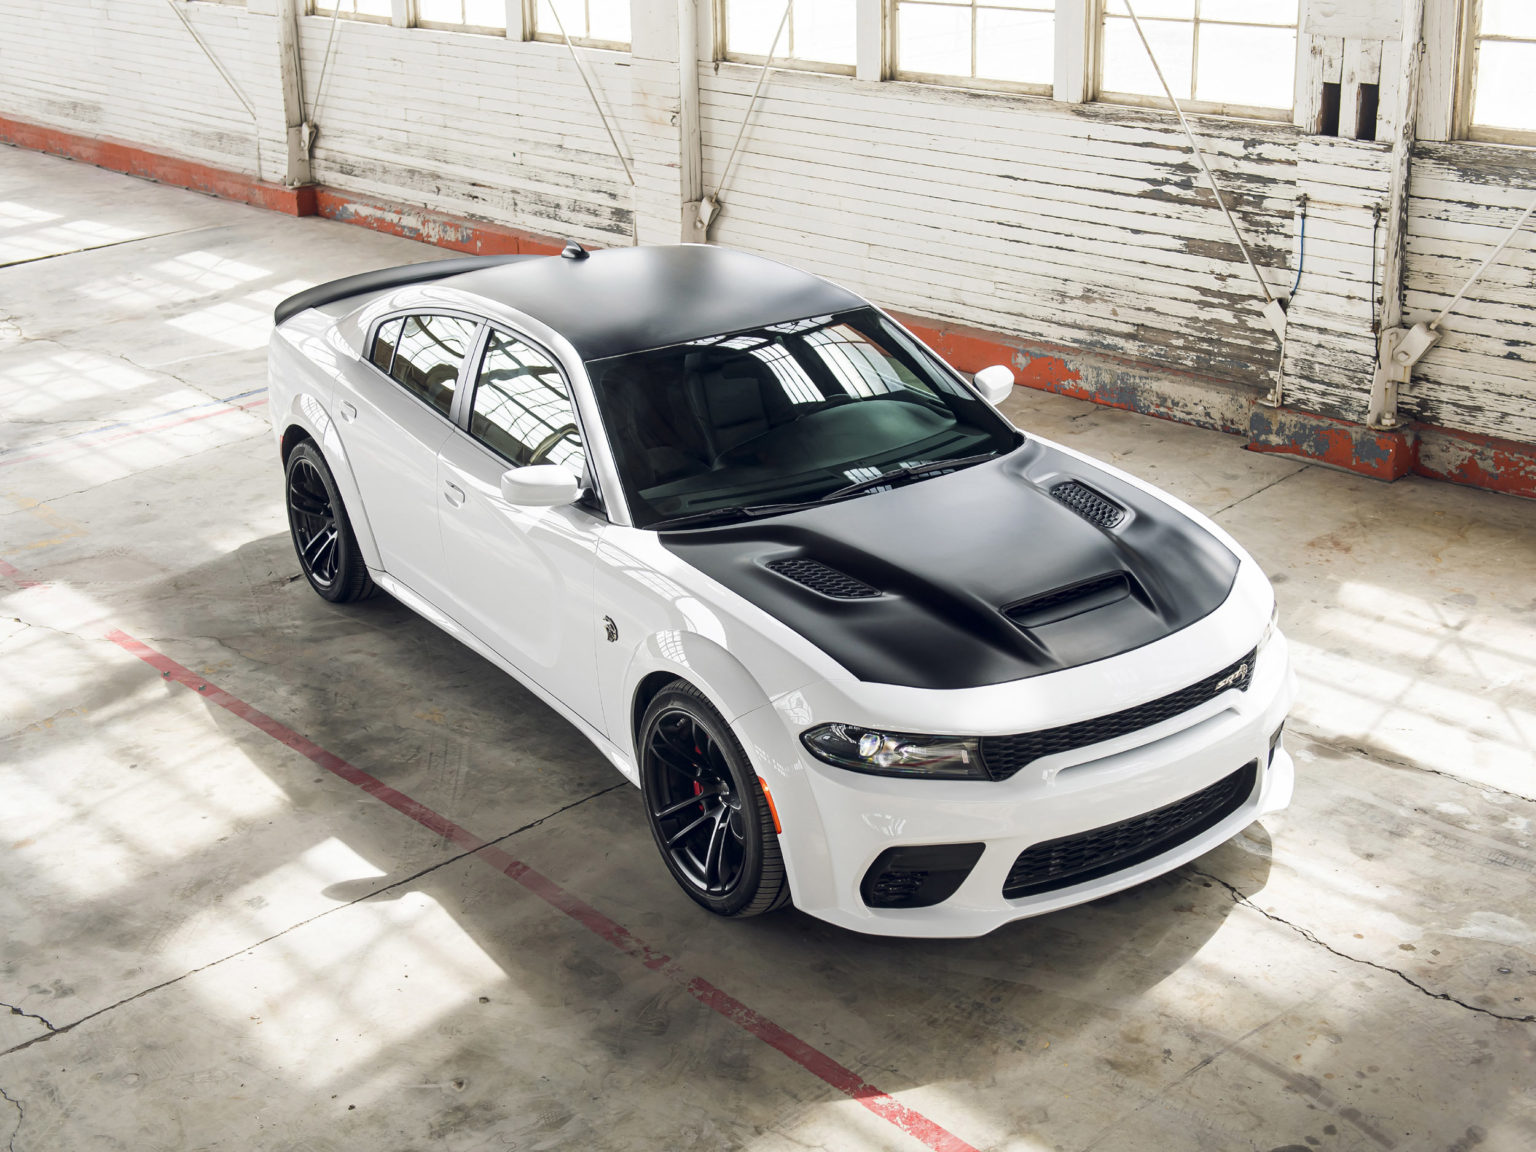 Dodge has designed a new top-tier variant of the Charger, the 2021 Dodge Charger SRT Hellcat Redeye.